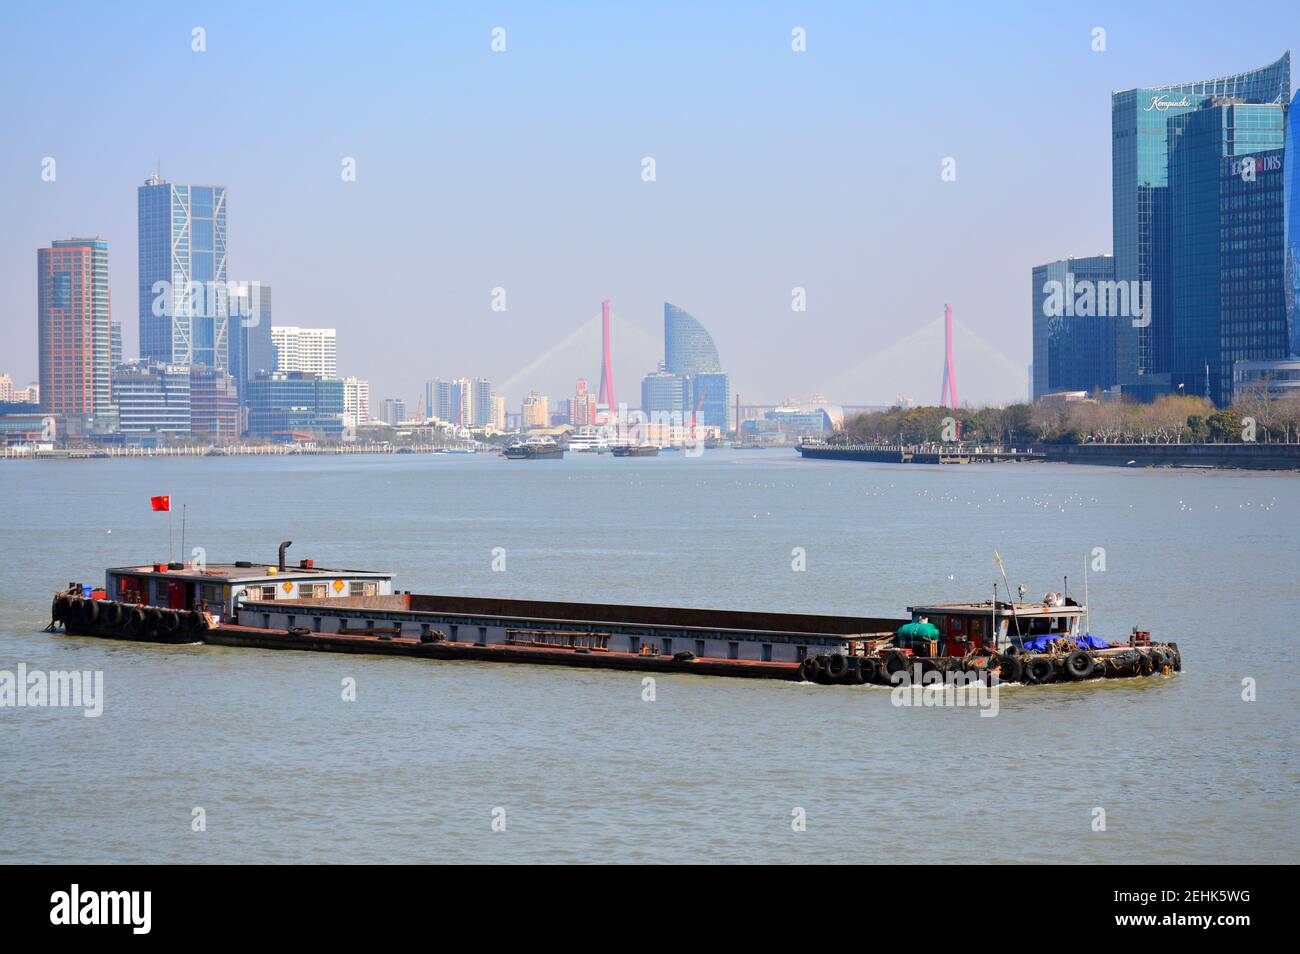 Barge transports goods along the Huangpu river, part of the Beijing to Hangzhou grand canal. Pudong district in the background. Feb 2021 Stock Photo